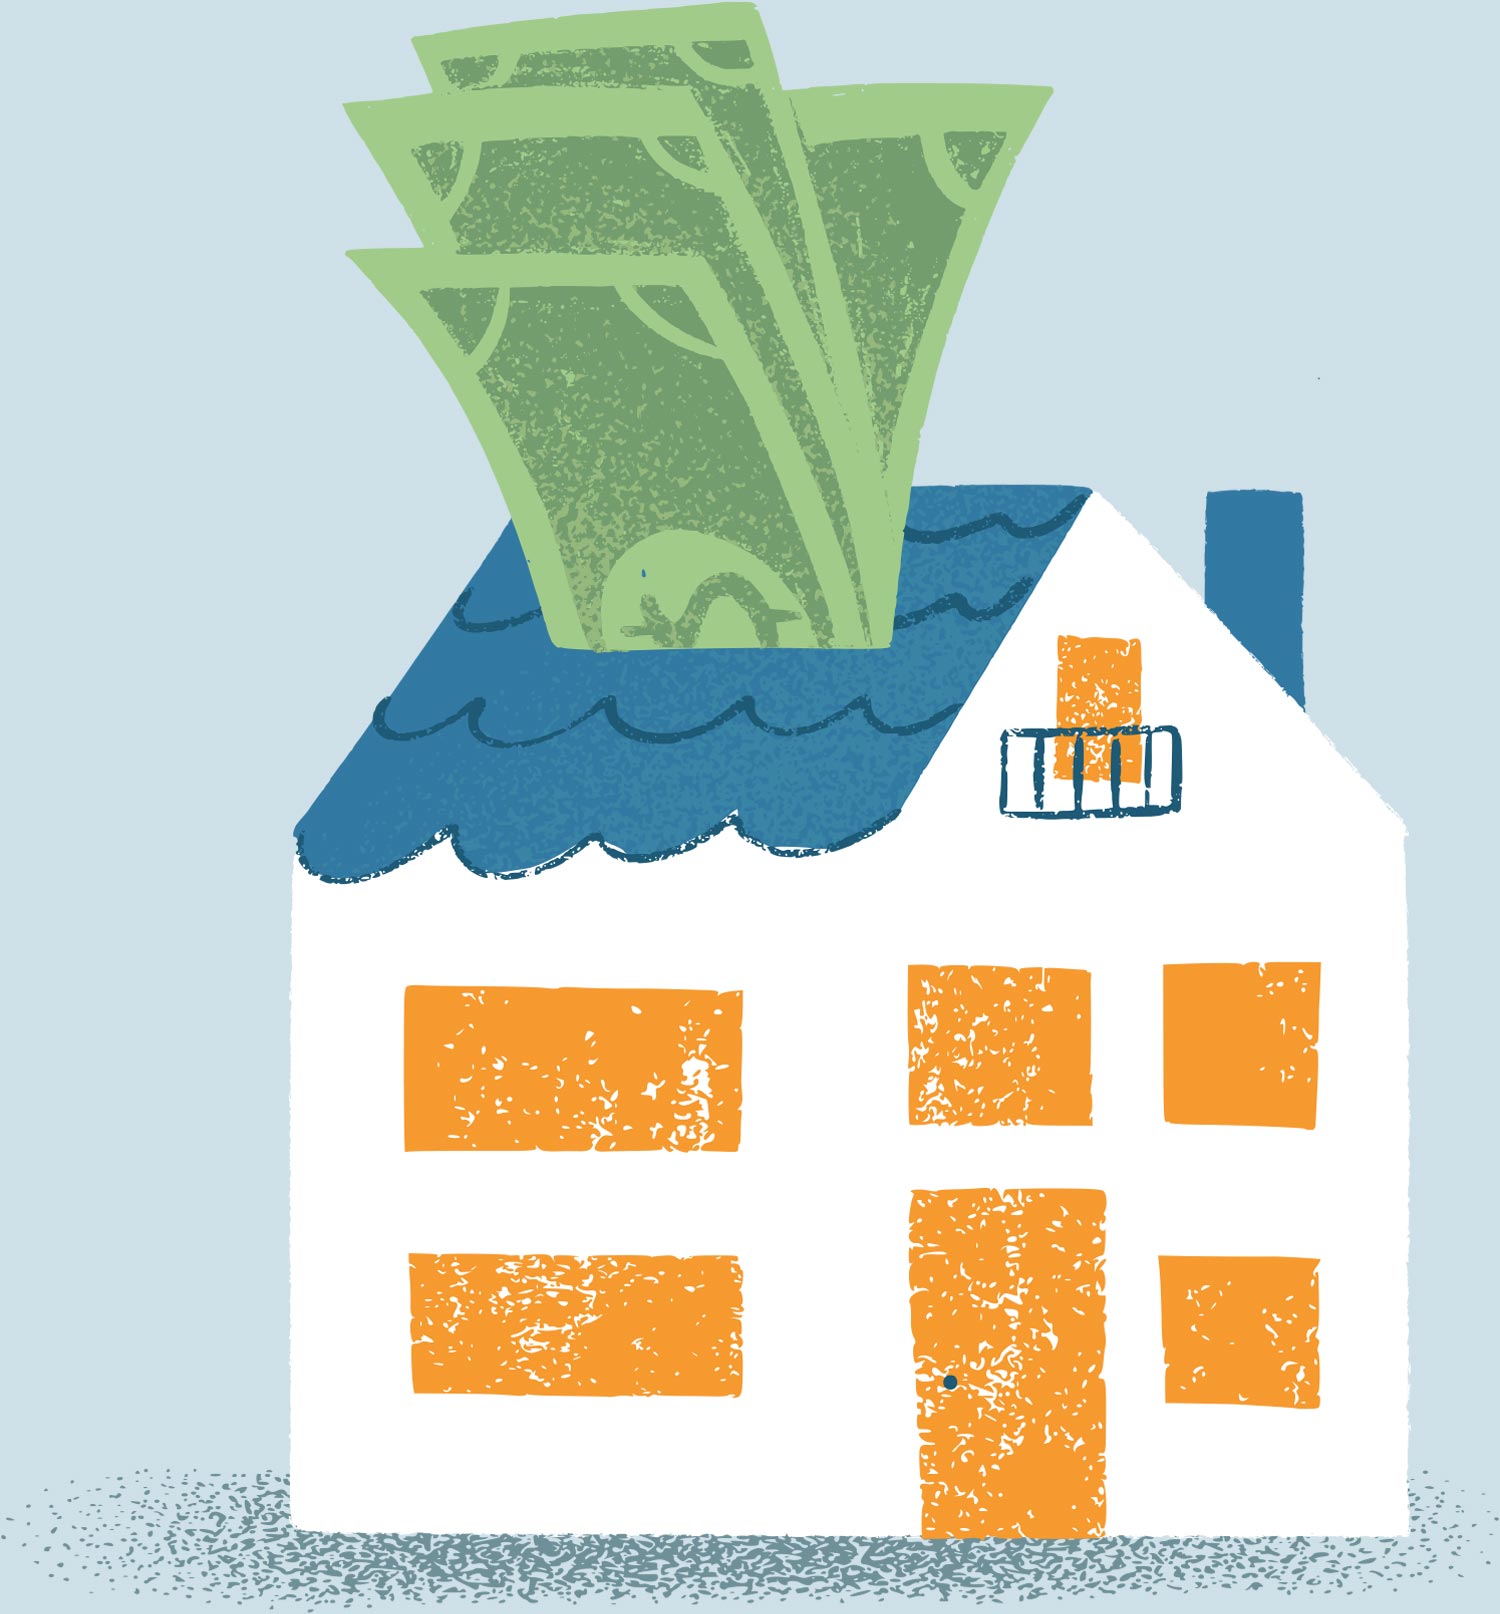 sketch-like illustration of a house with dollar bills sticking out of the roof